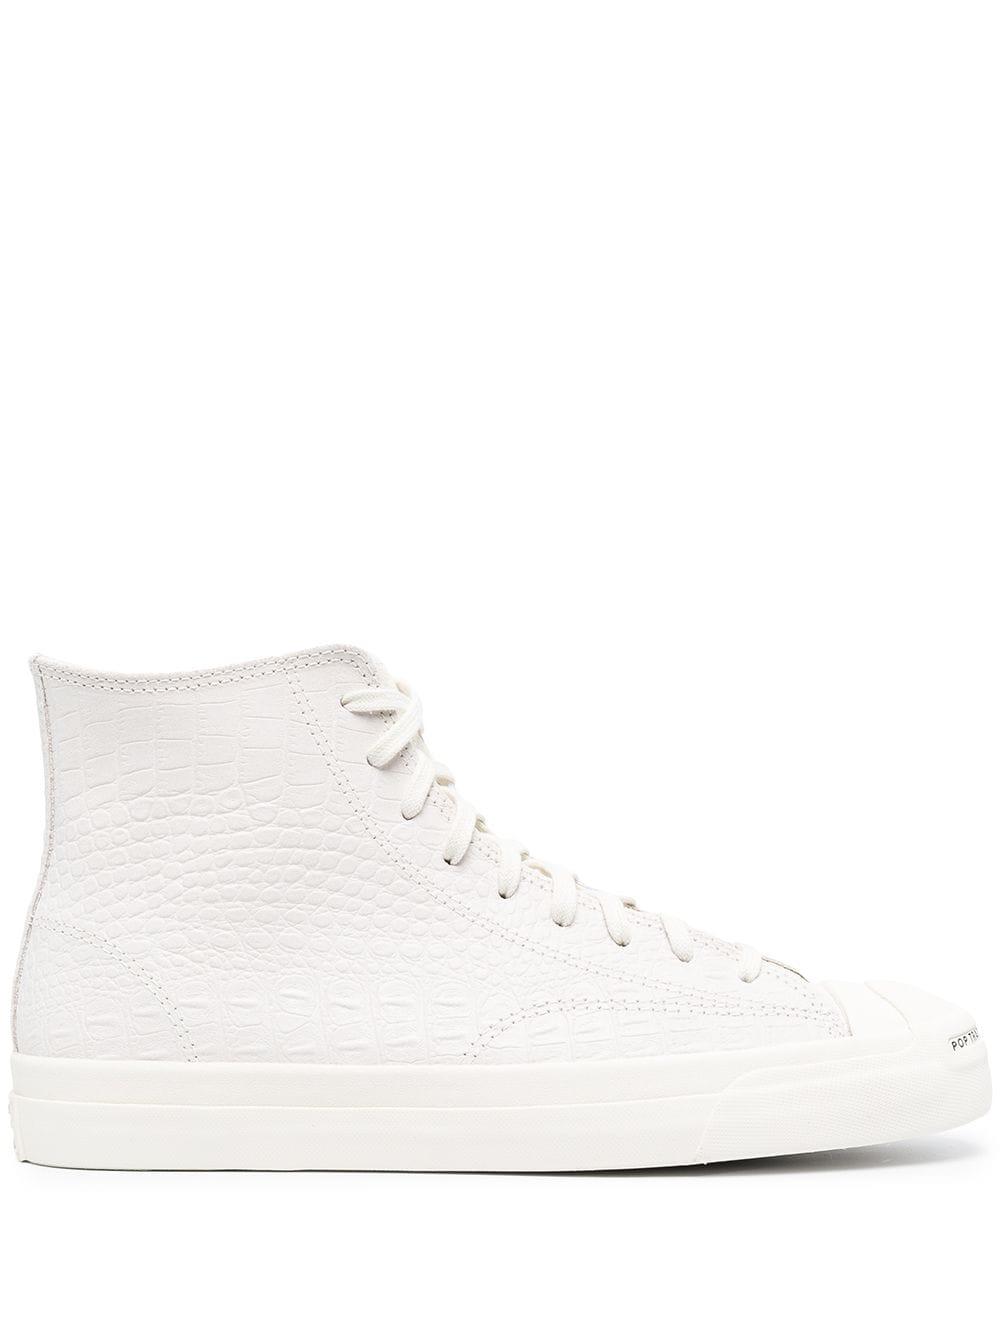 Converse Leather Crocodile-effect High-top Sneakers in White for Men | Lyst